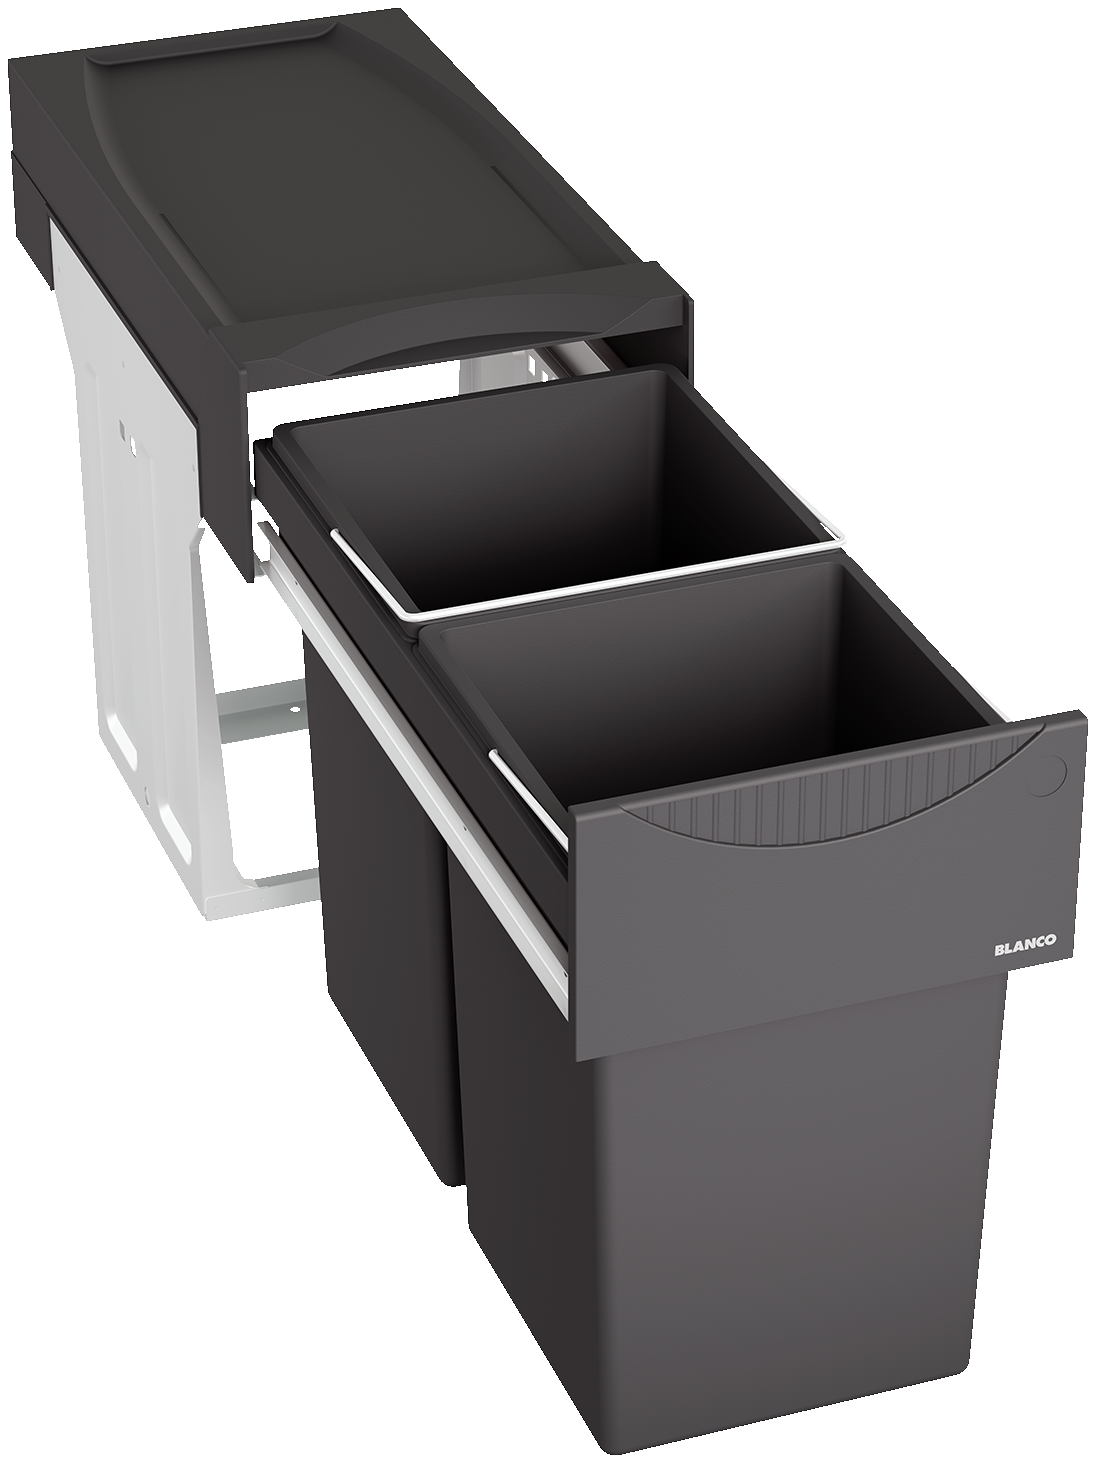 Botton II waste solution from BLANCO